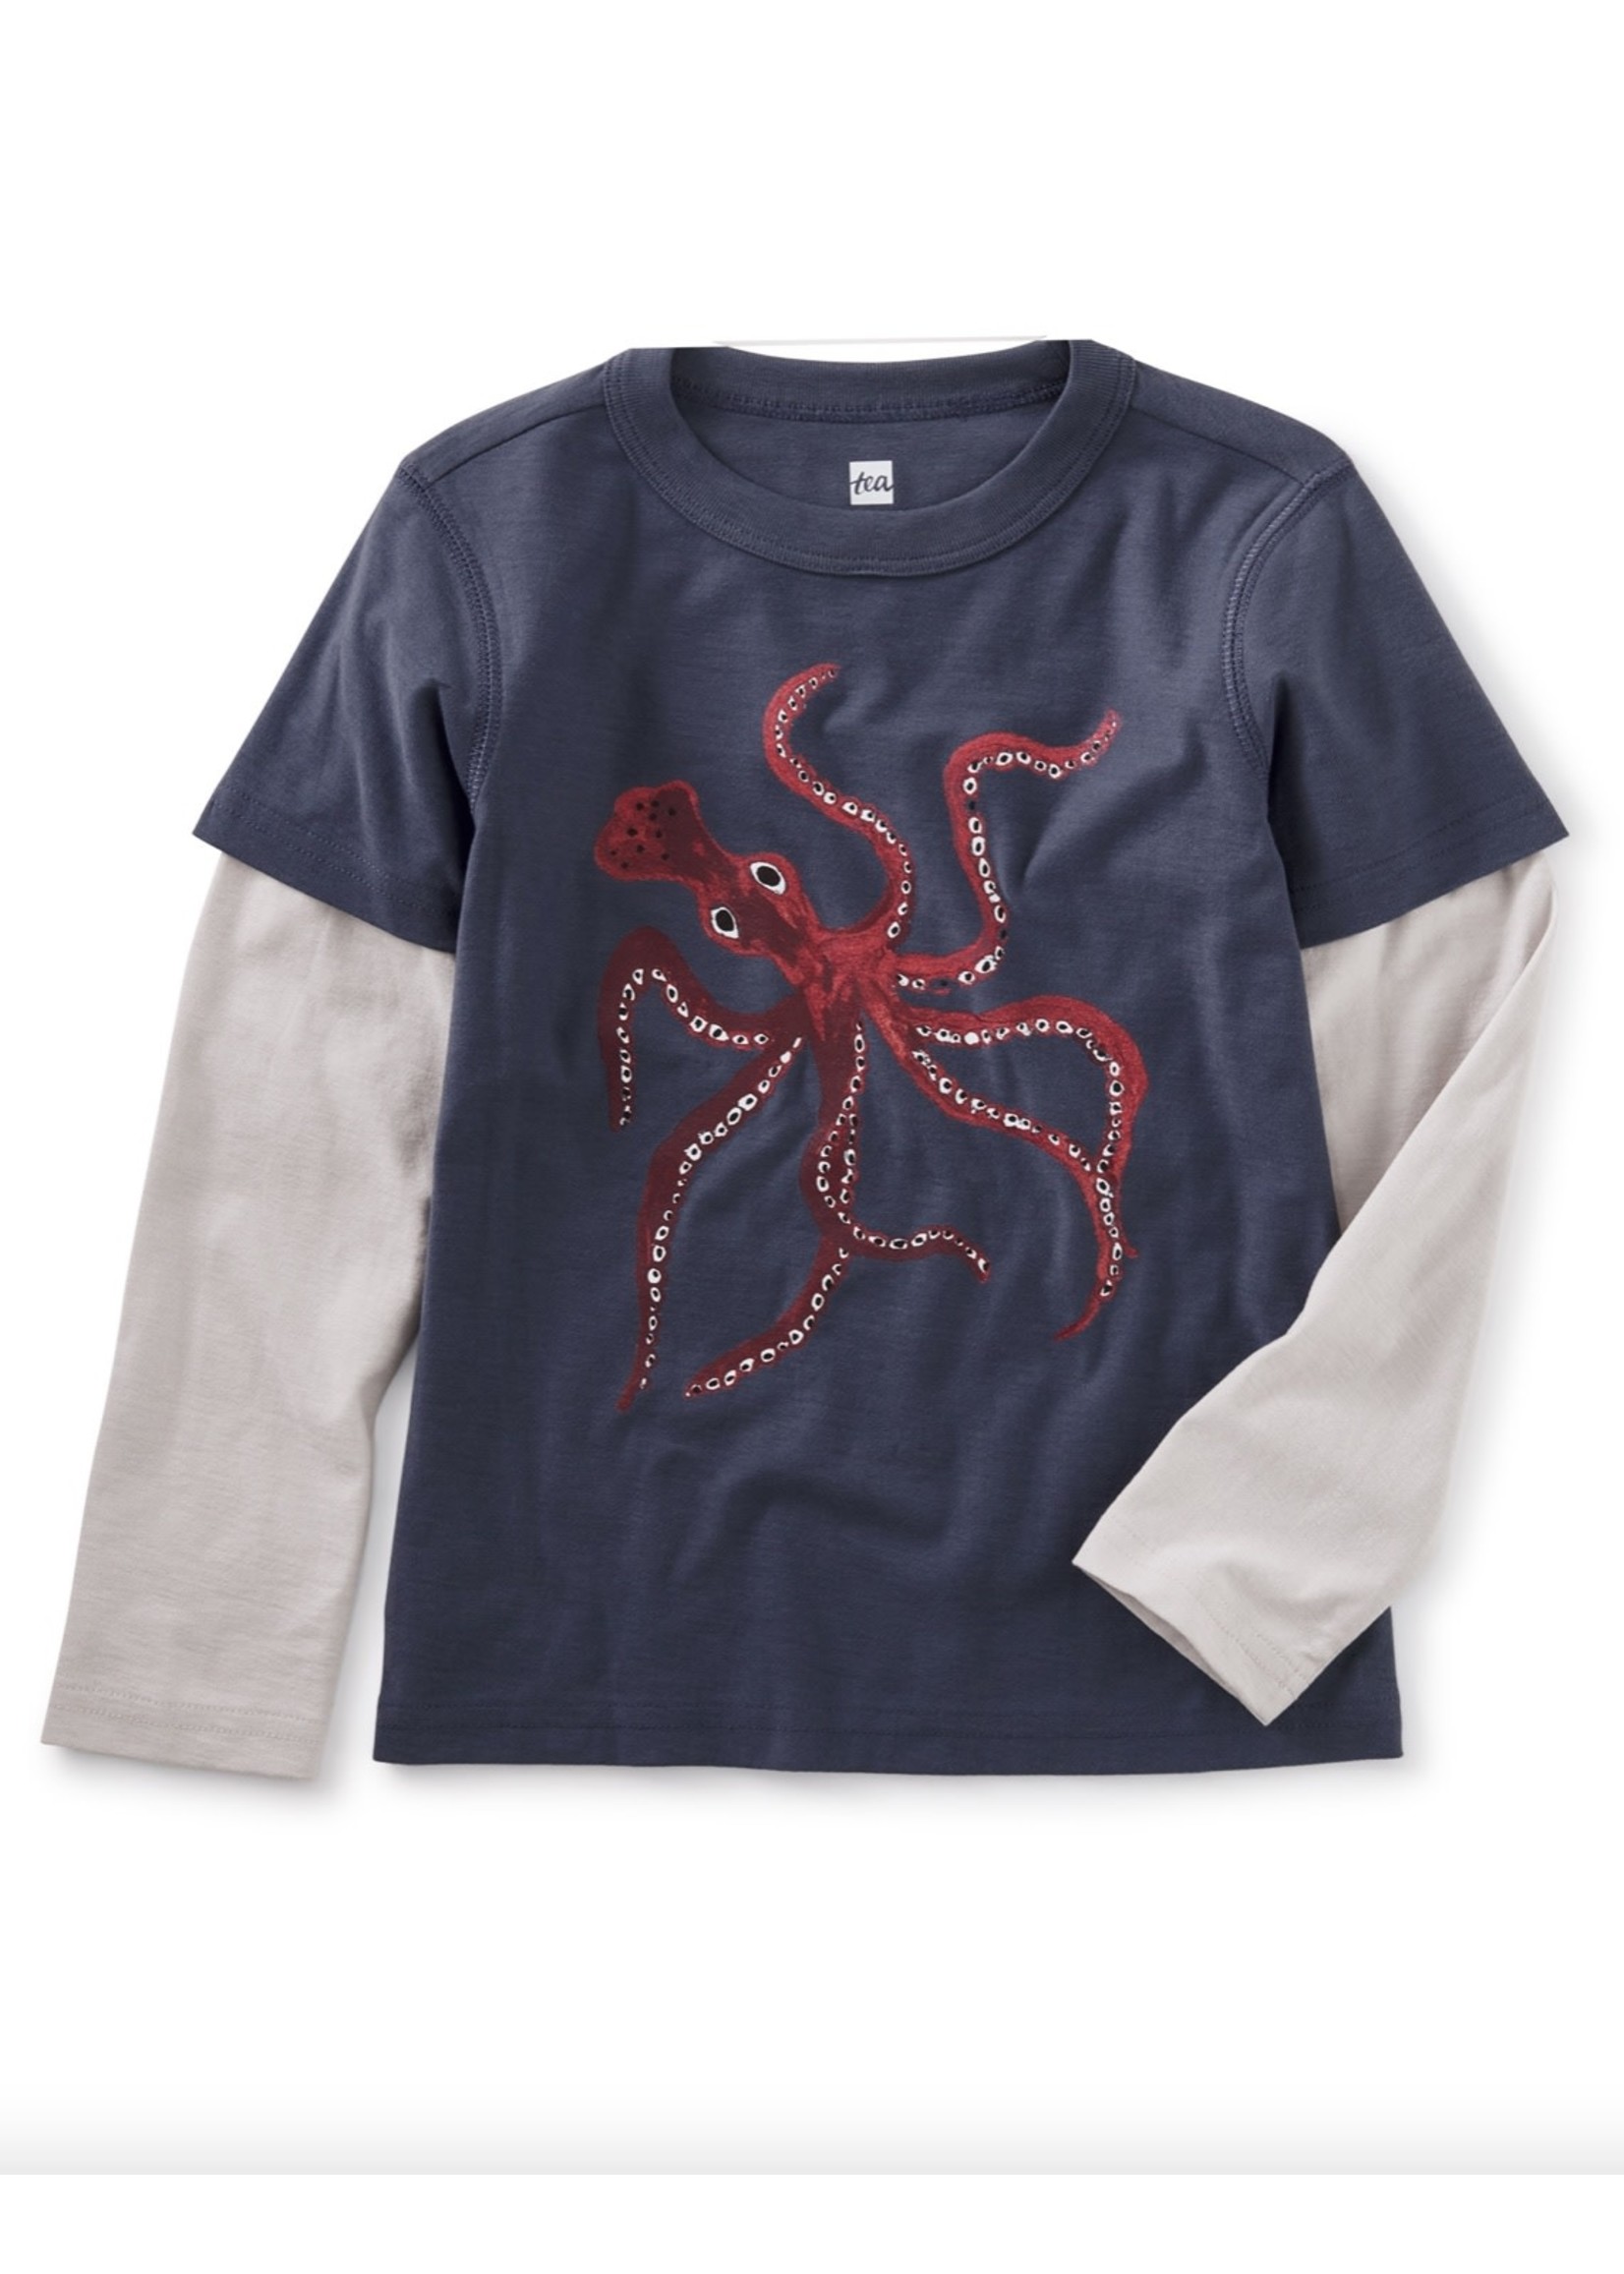 Tea Collection Awesome Octo Graphic Long Sleeve Tee in Triumph